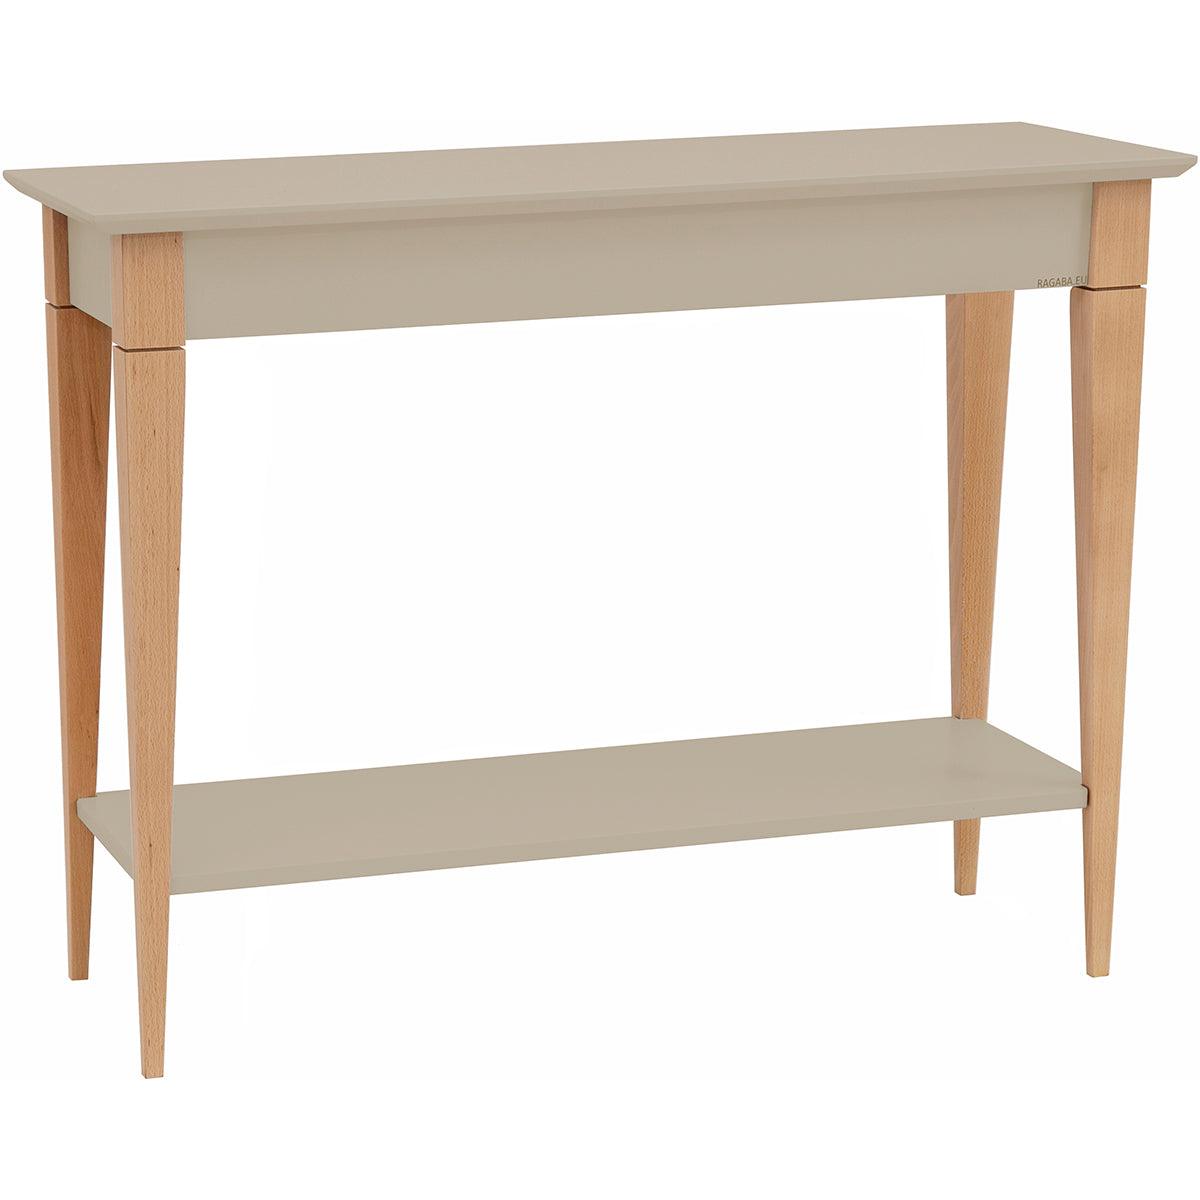 Mimo Console Table - WOO .Design